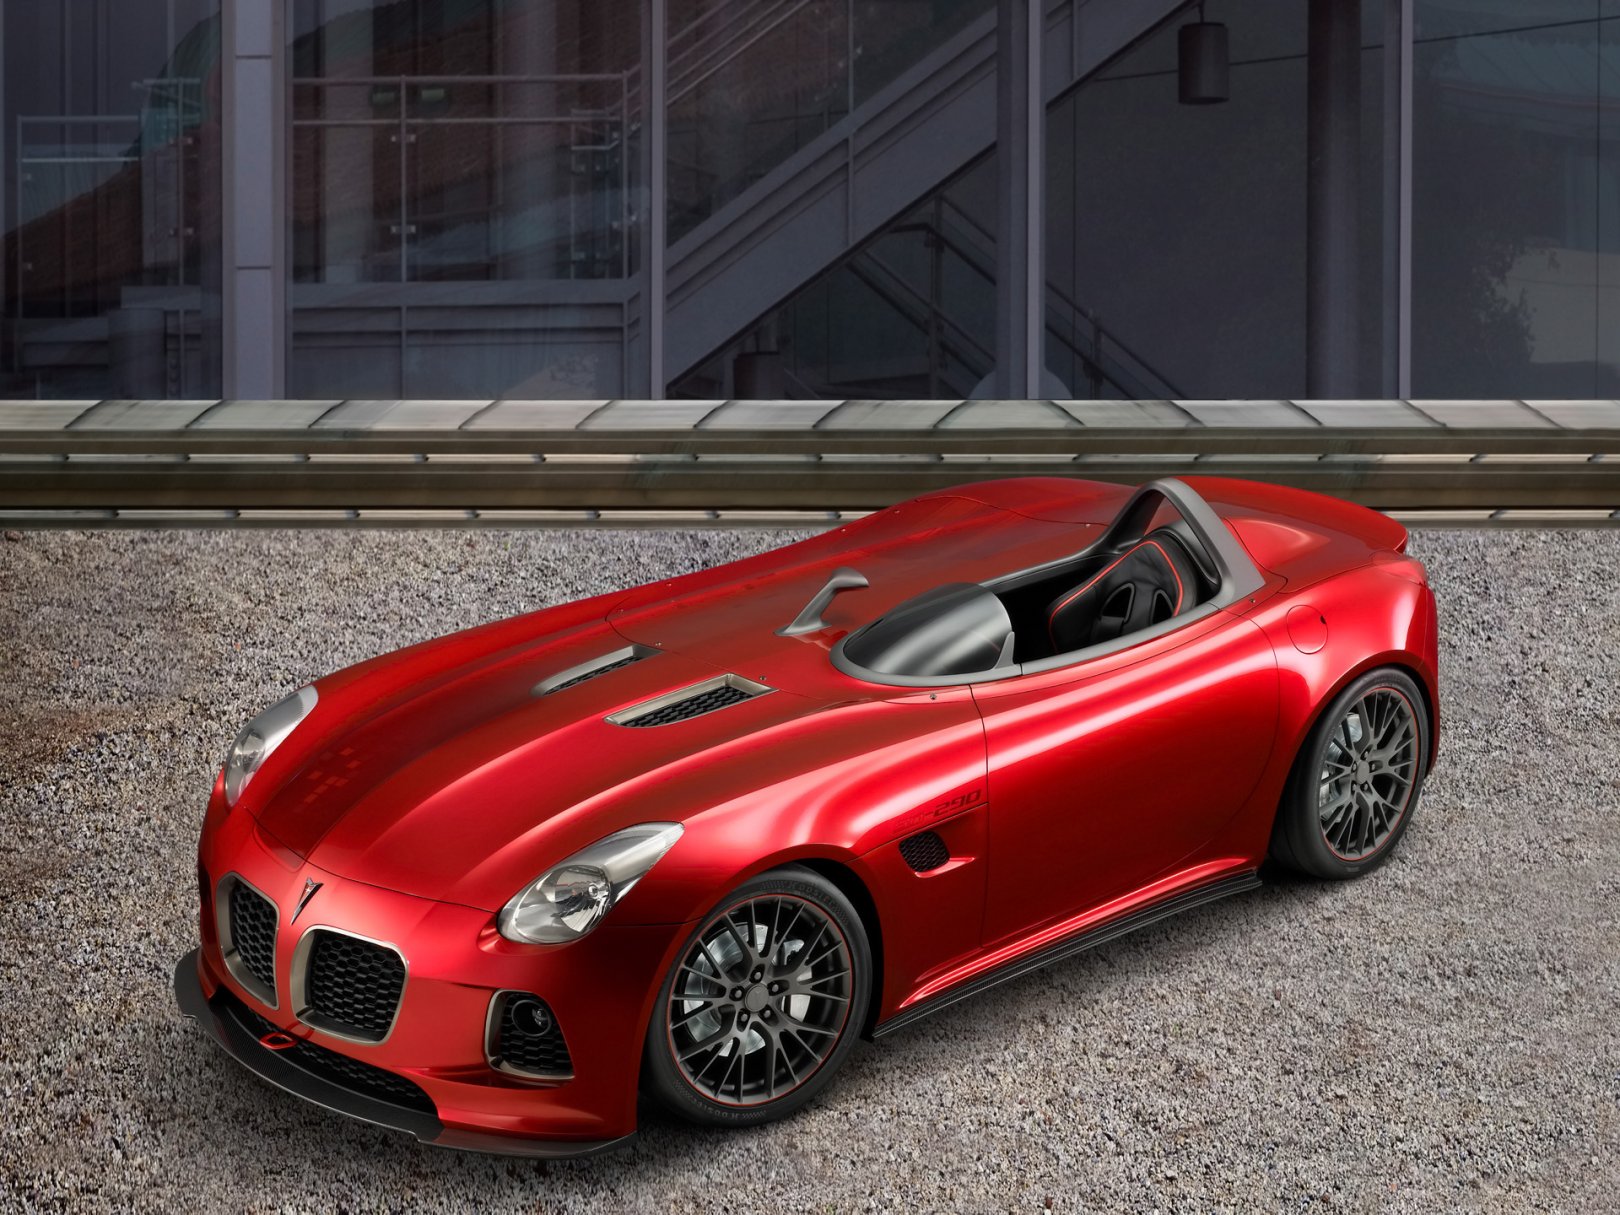 Foto: Pontiac Solstice SD 290 Front And Side (2007)